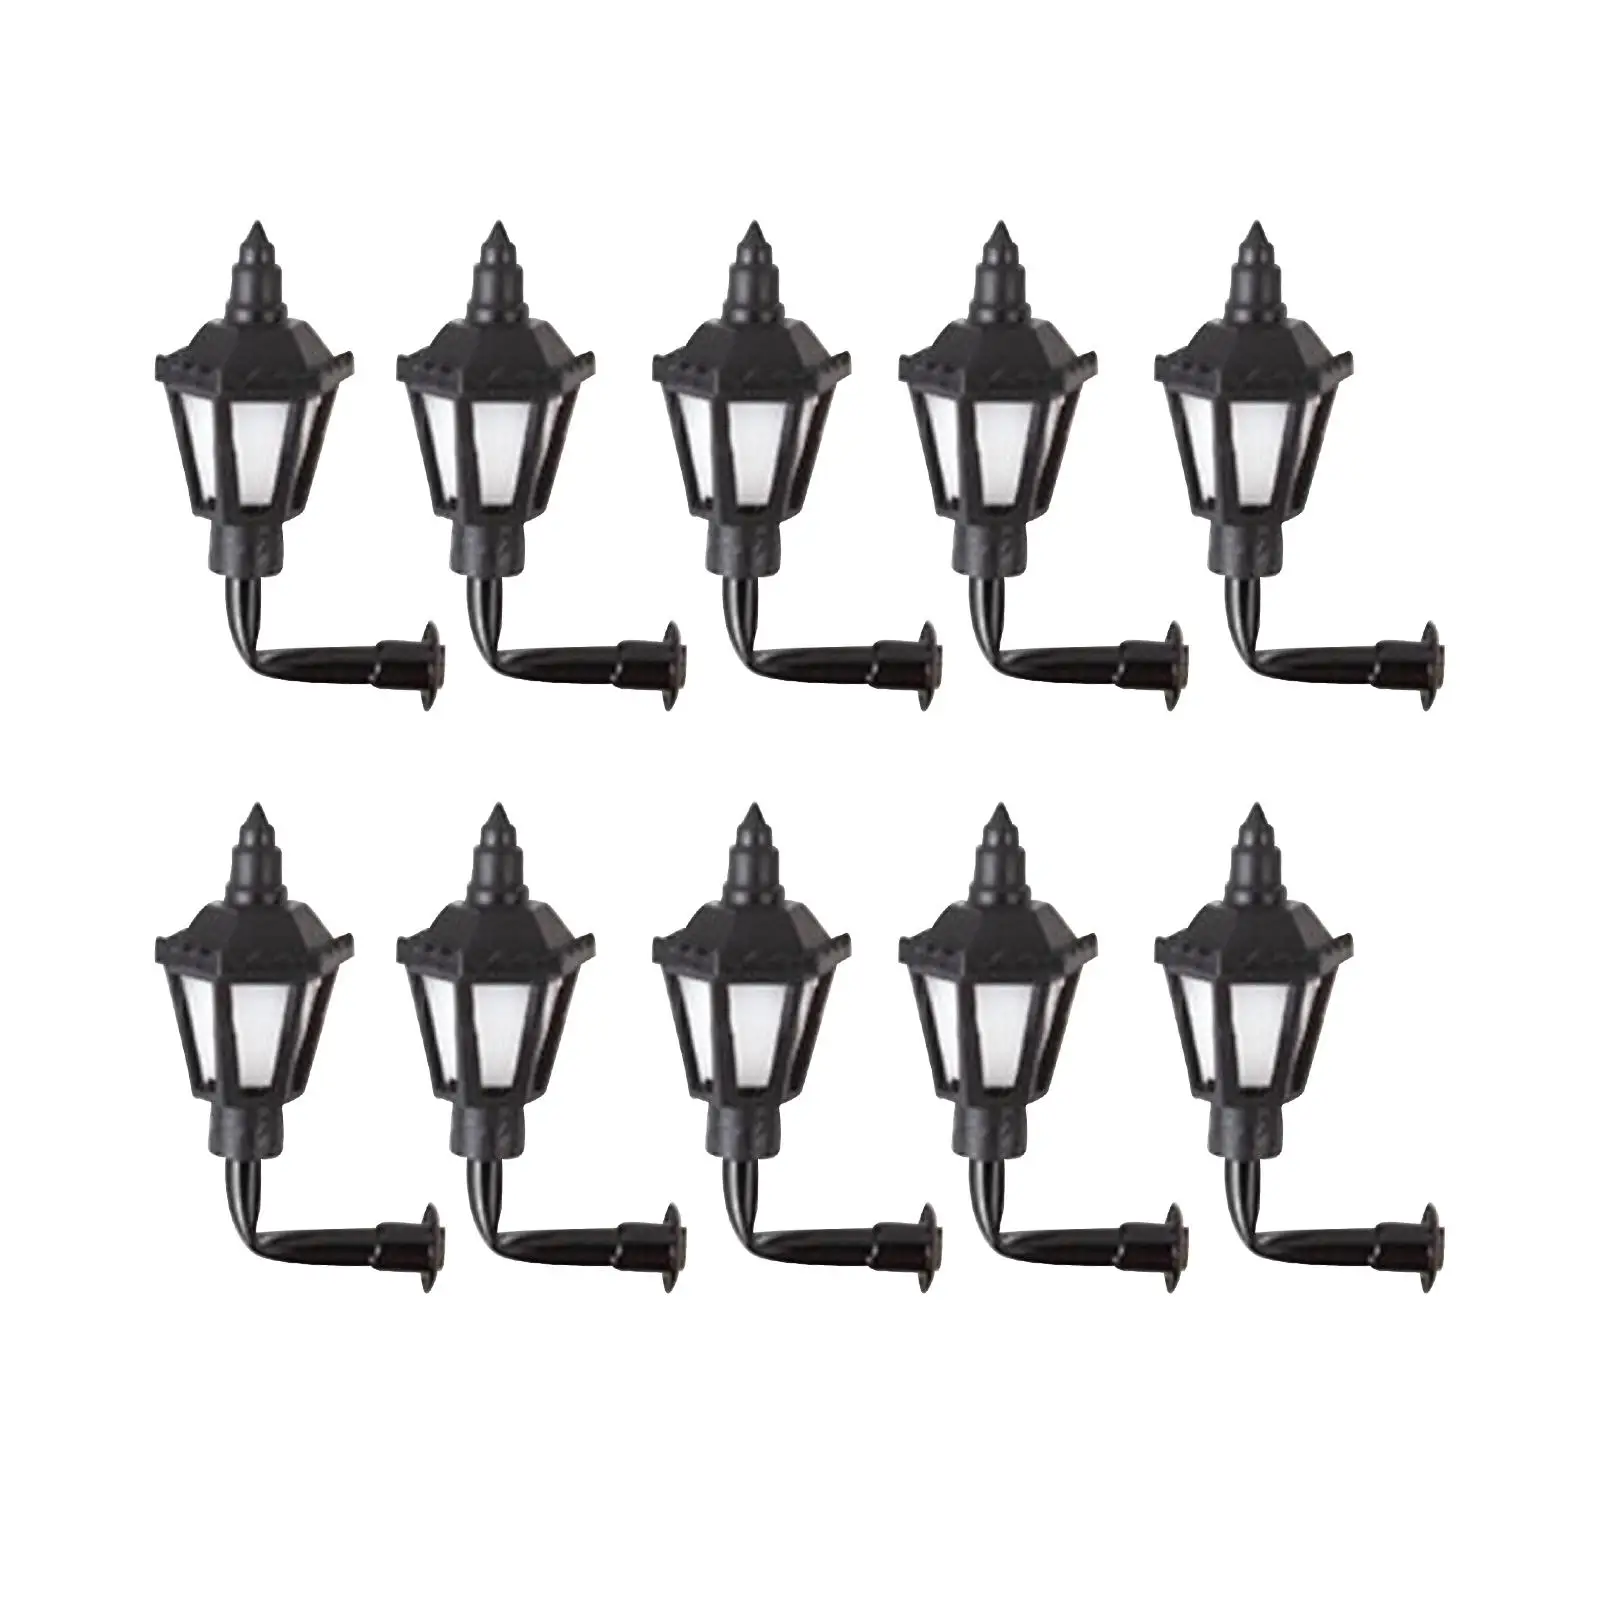 10 Pieces Model Railway Lamps 1:87 Garden Lighting Accessories for Dollhouse Decoration Simulation Decoration Hanging Lamp